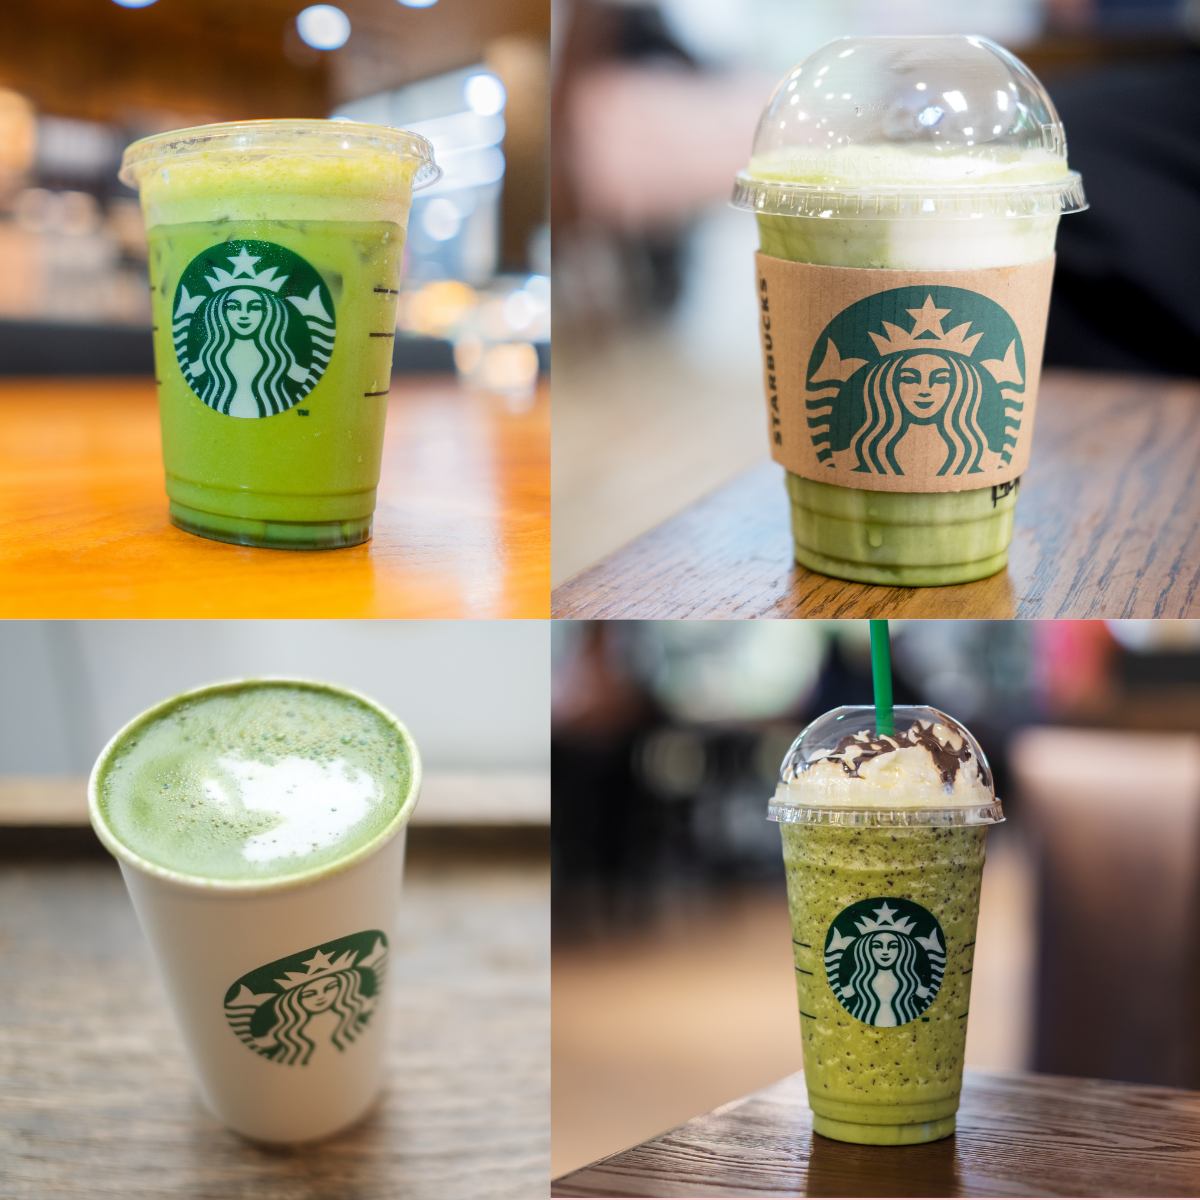 4 pictures of starbucks matcha drinks